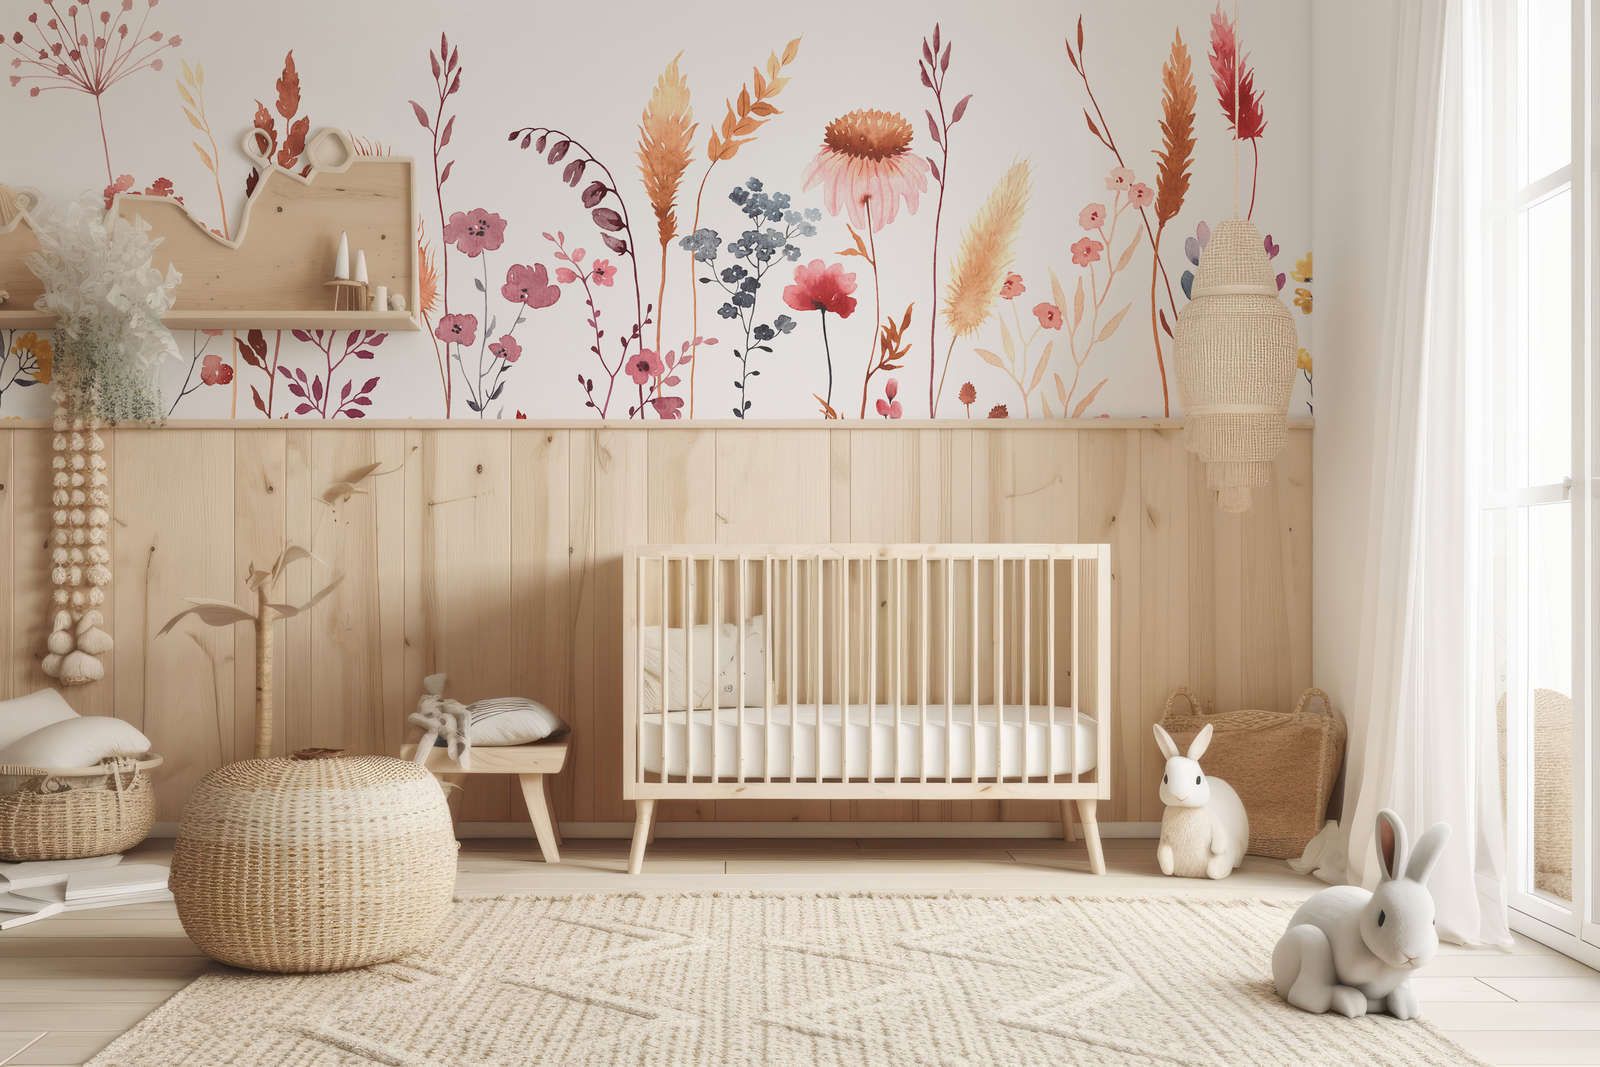             Photo wallpaper for children's room with leaves and grasses - Smooth & matt non-woven
        